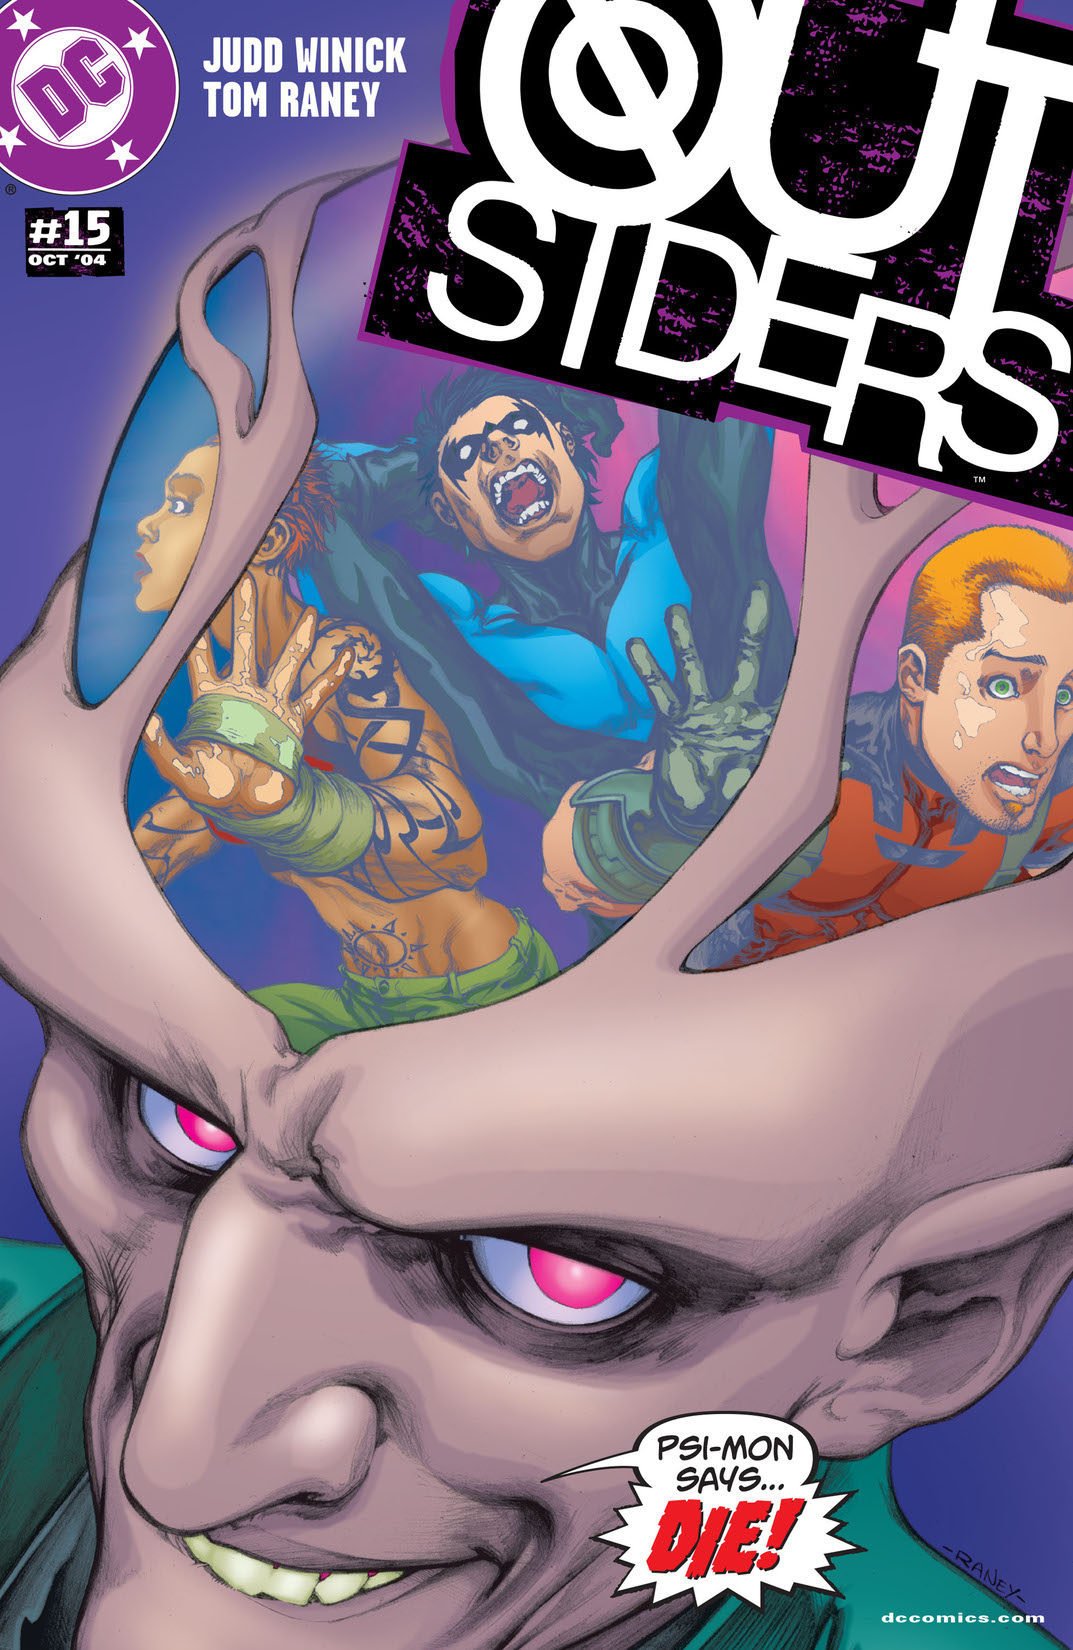 Outsiders (2003-) #15 preview images